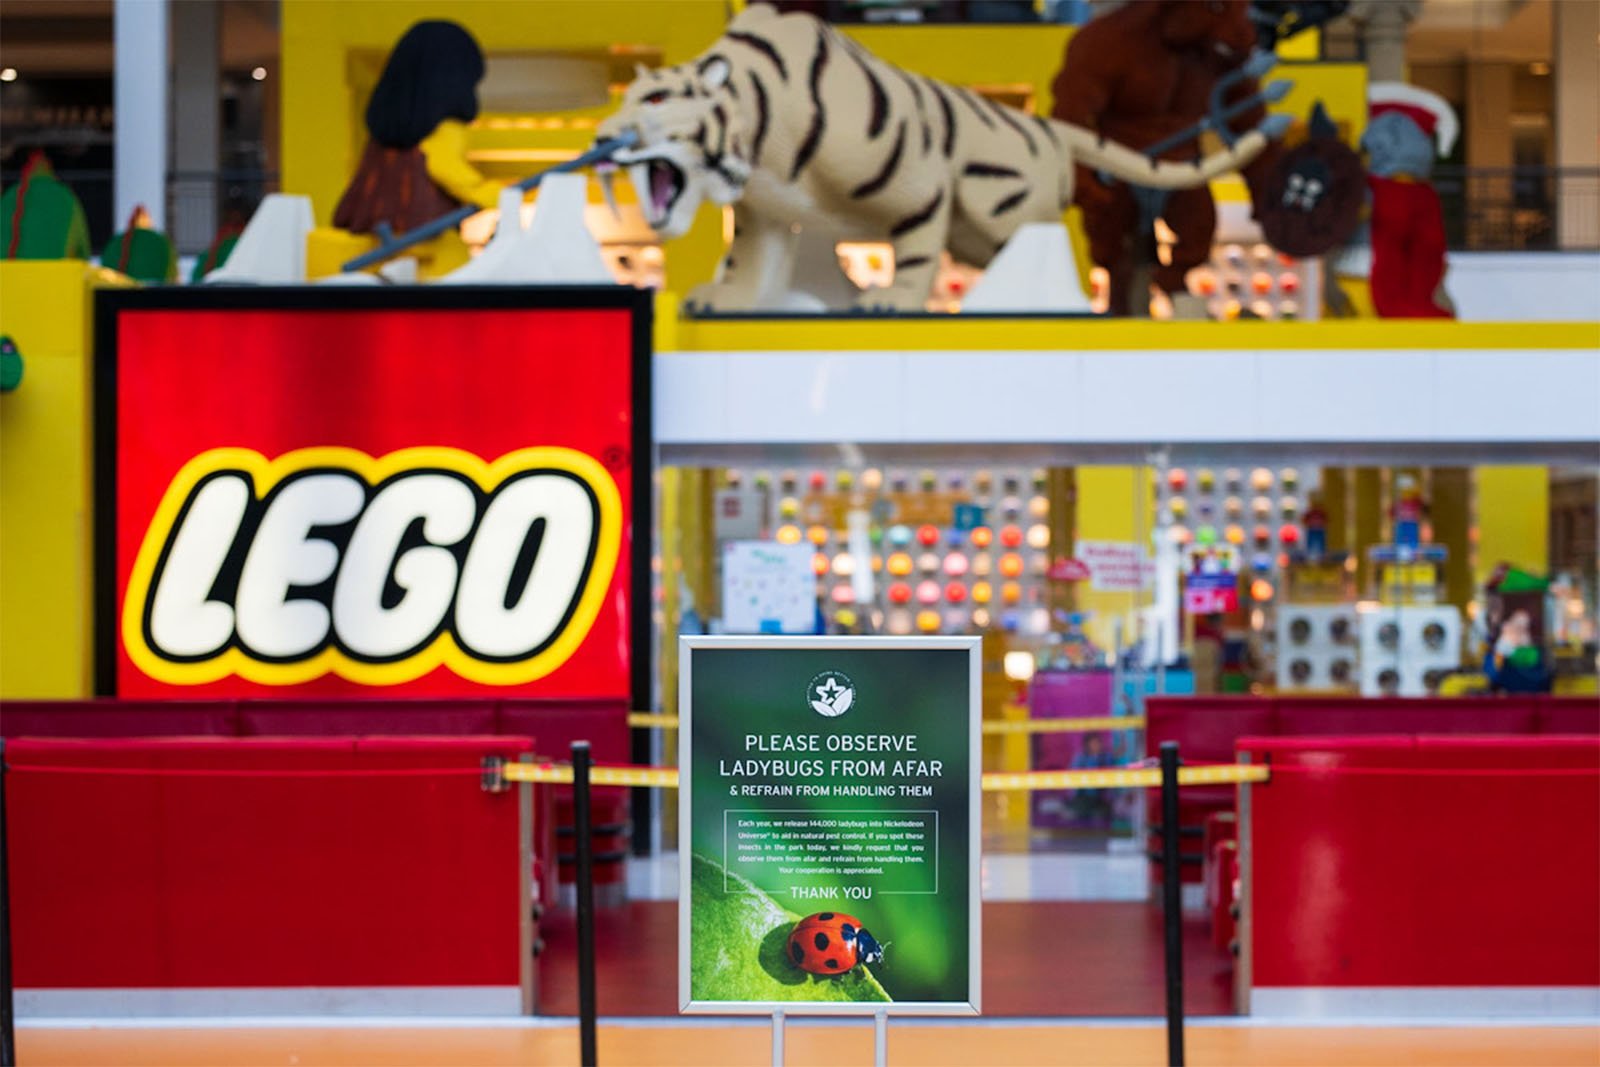 Bright lego store entrance displaying large lego logo with models of animals like a tiger and bear. foreground has a sign requesting to observe ladybugs from afar for a scavenger hunt.